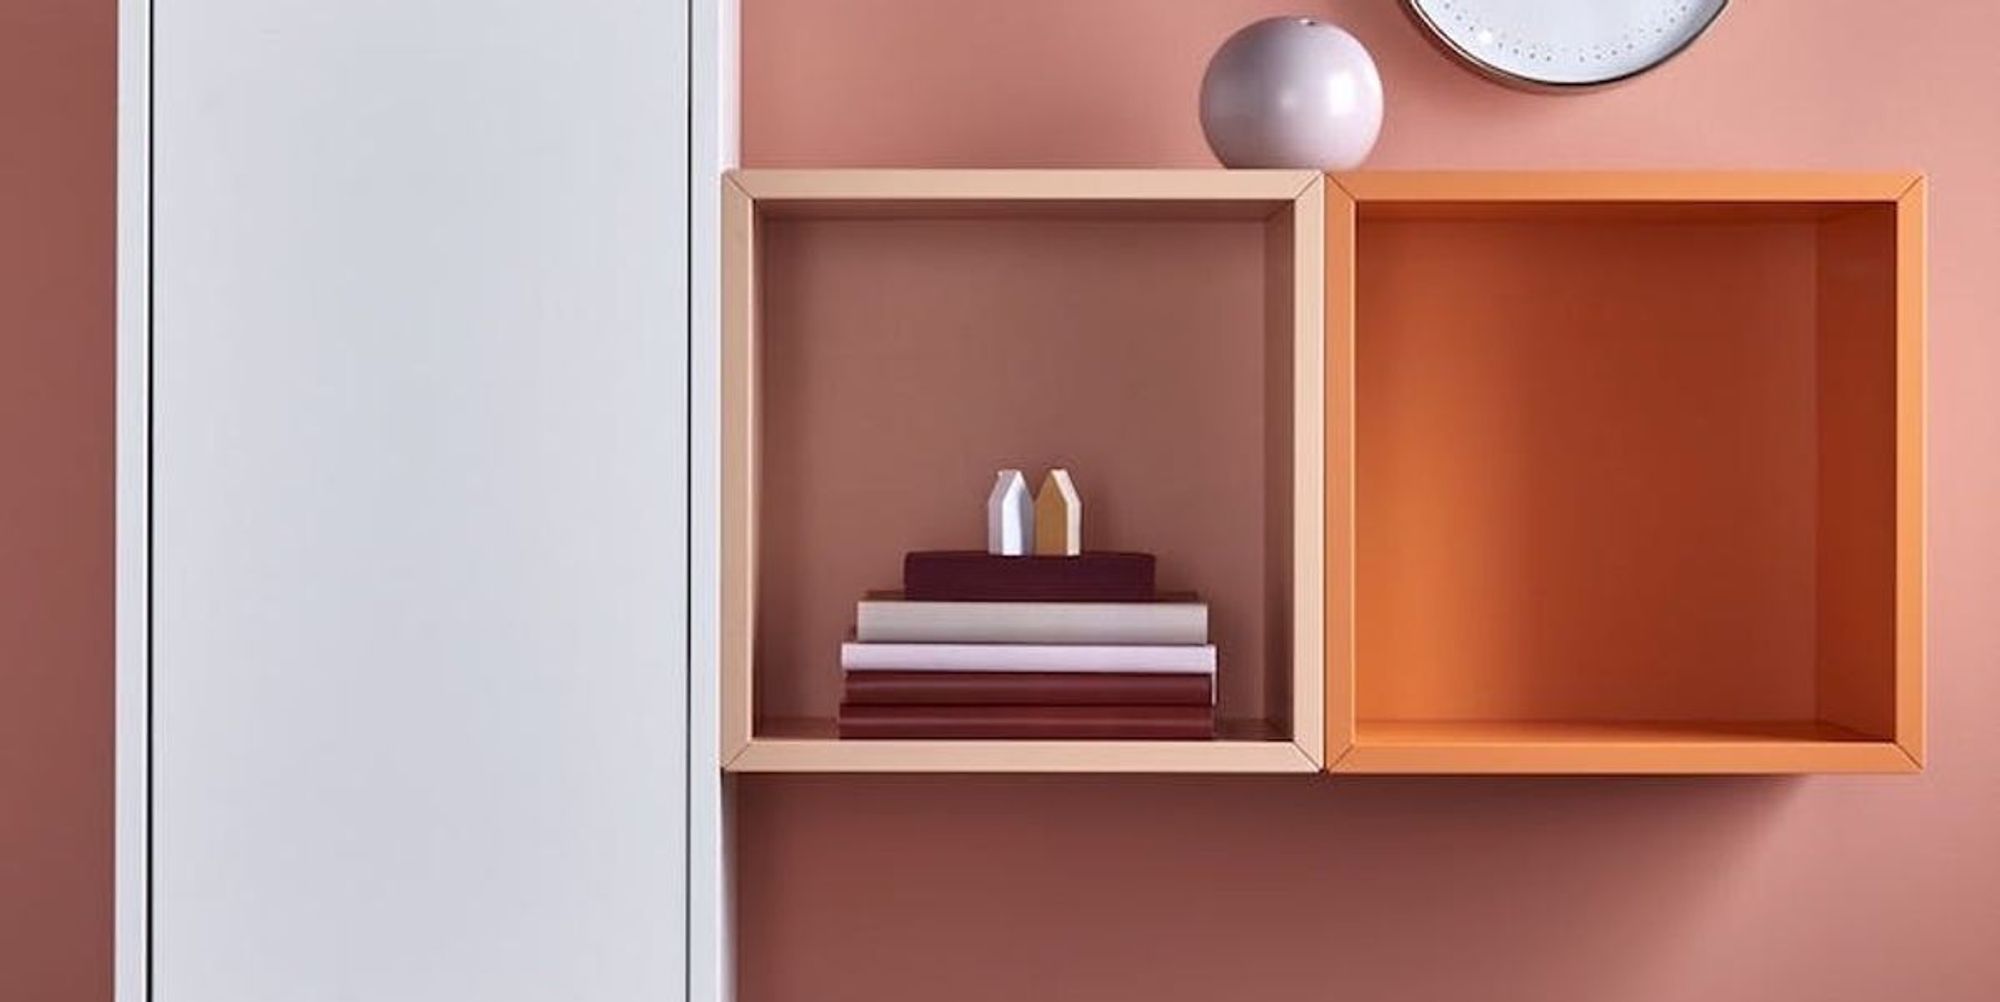 The Top 5 Design Trends We Re Stealing From Ikea S 2019 Catalog